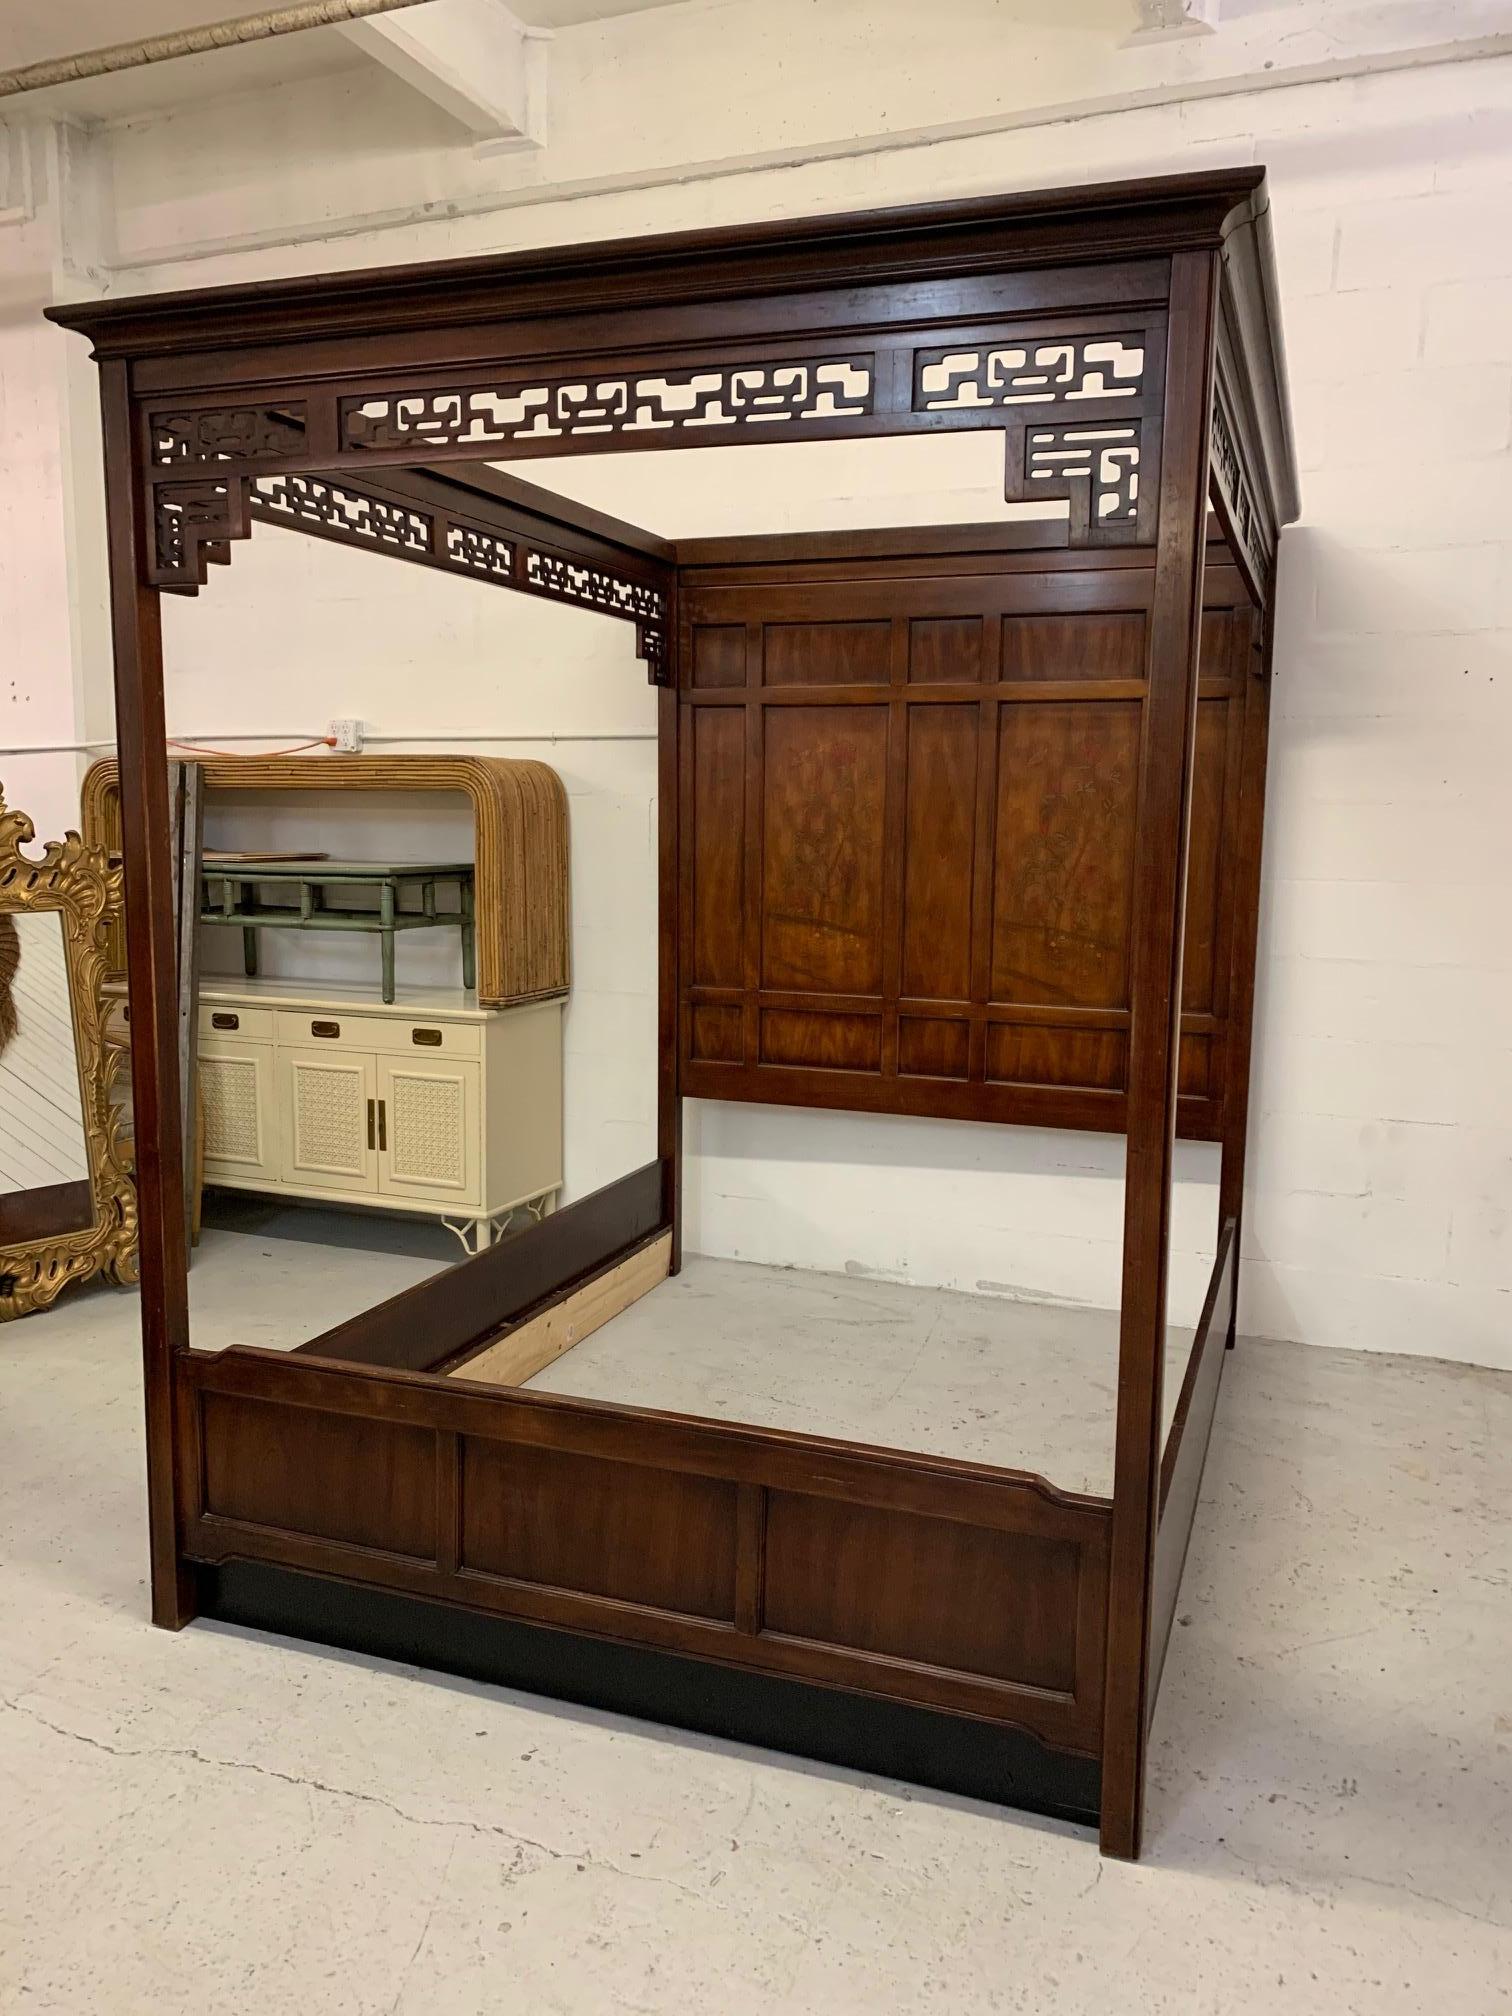 Queen size poster bed by Bernhardt in Asian chinoiserie style features hand carved inlayed headboard and fine cut detailing along top rails. Good condition with minor imperfections consistent with age.